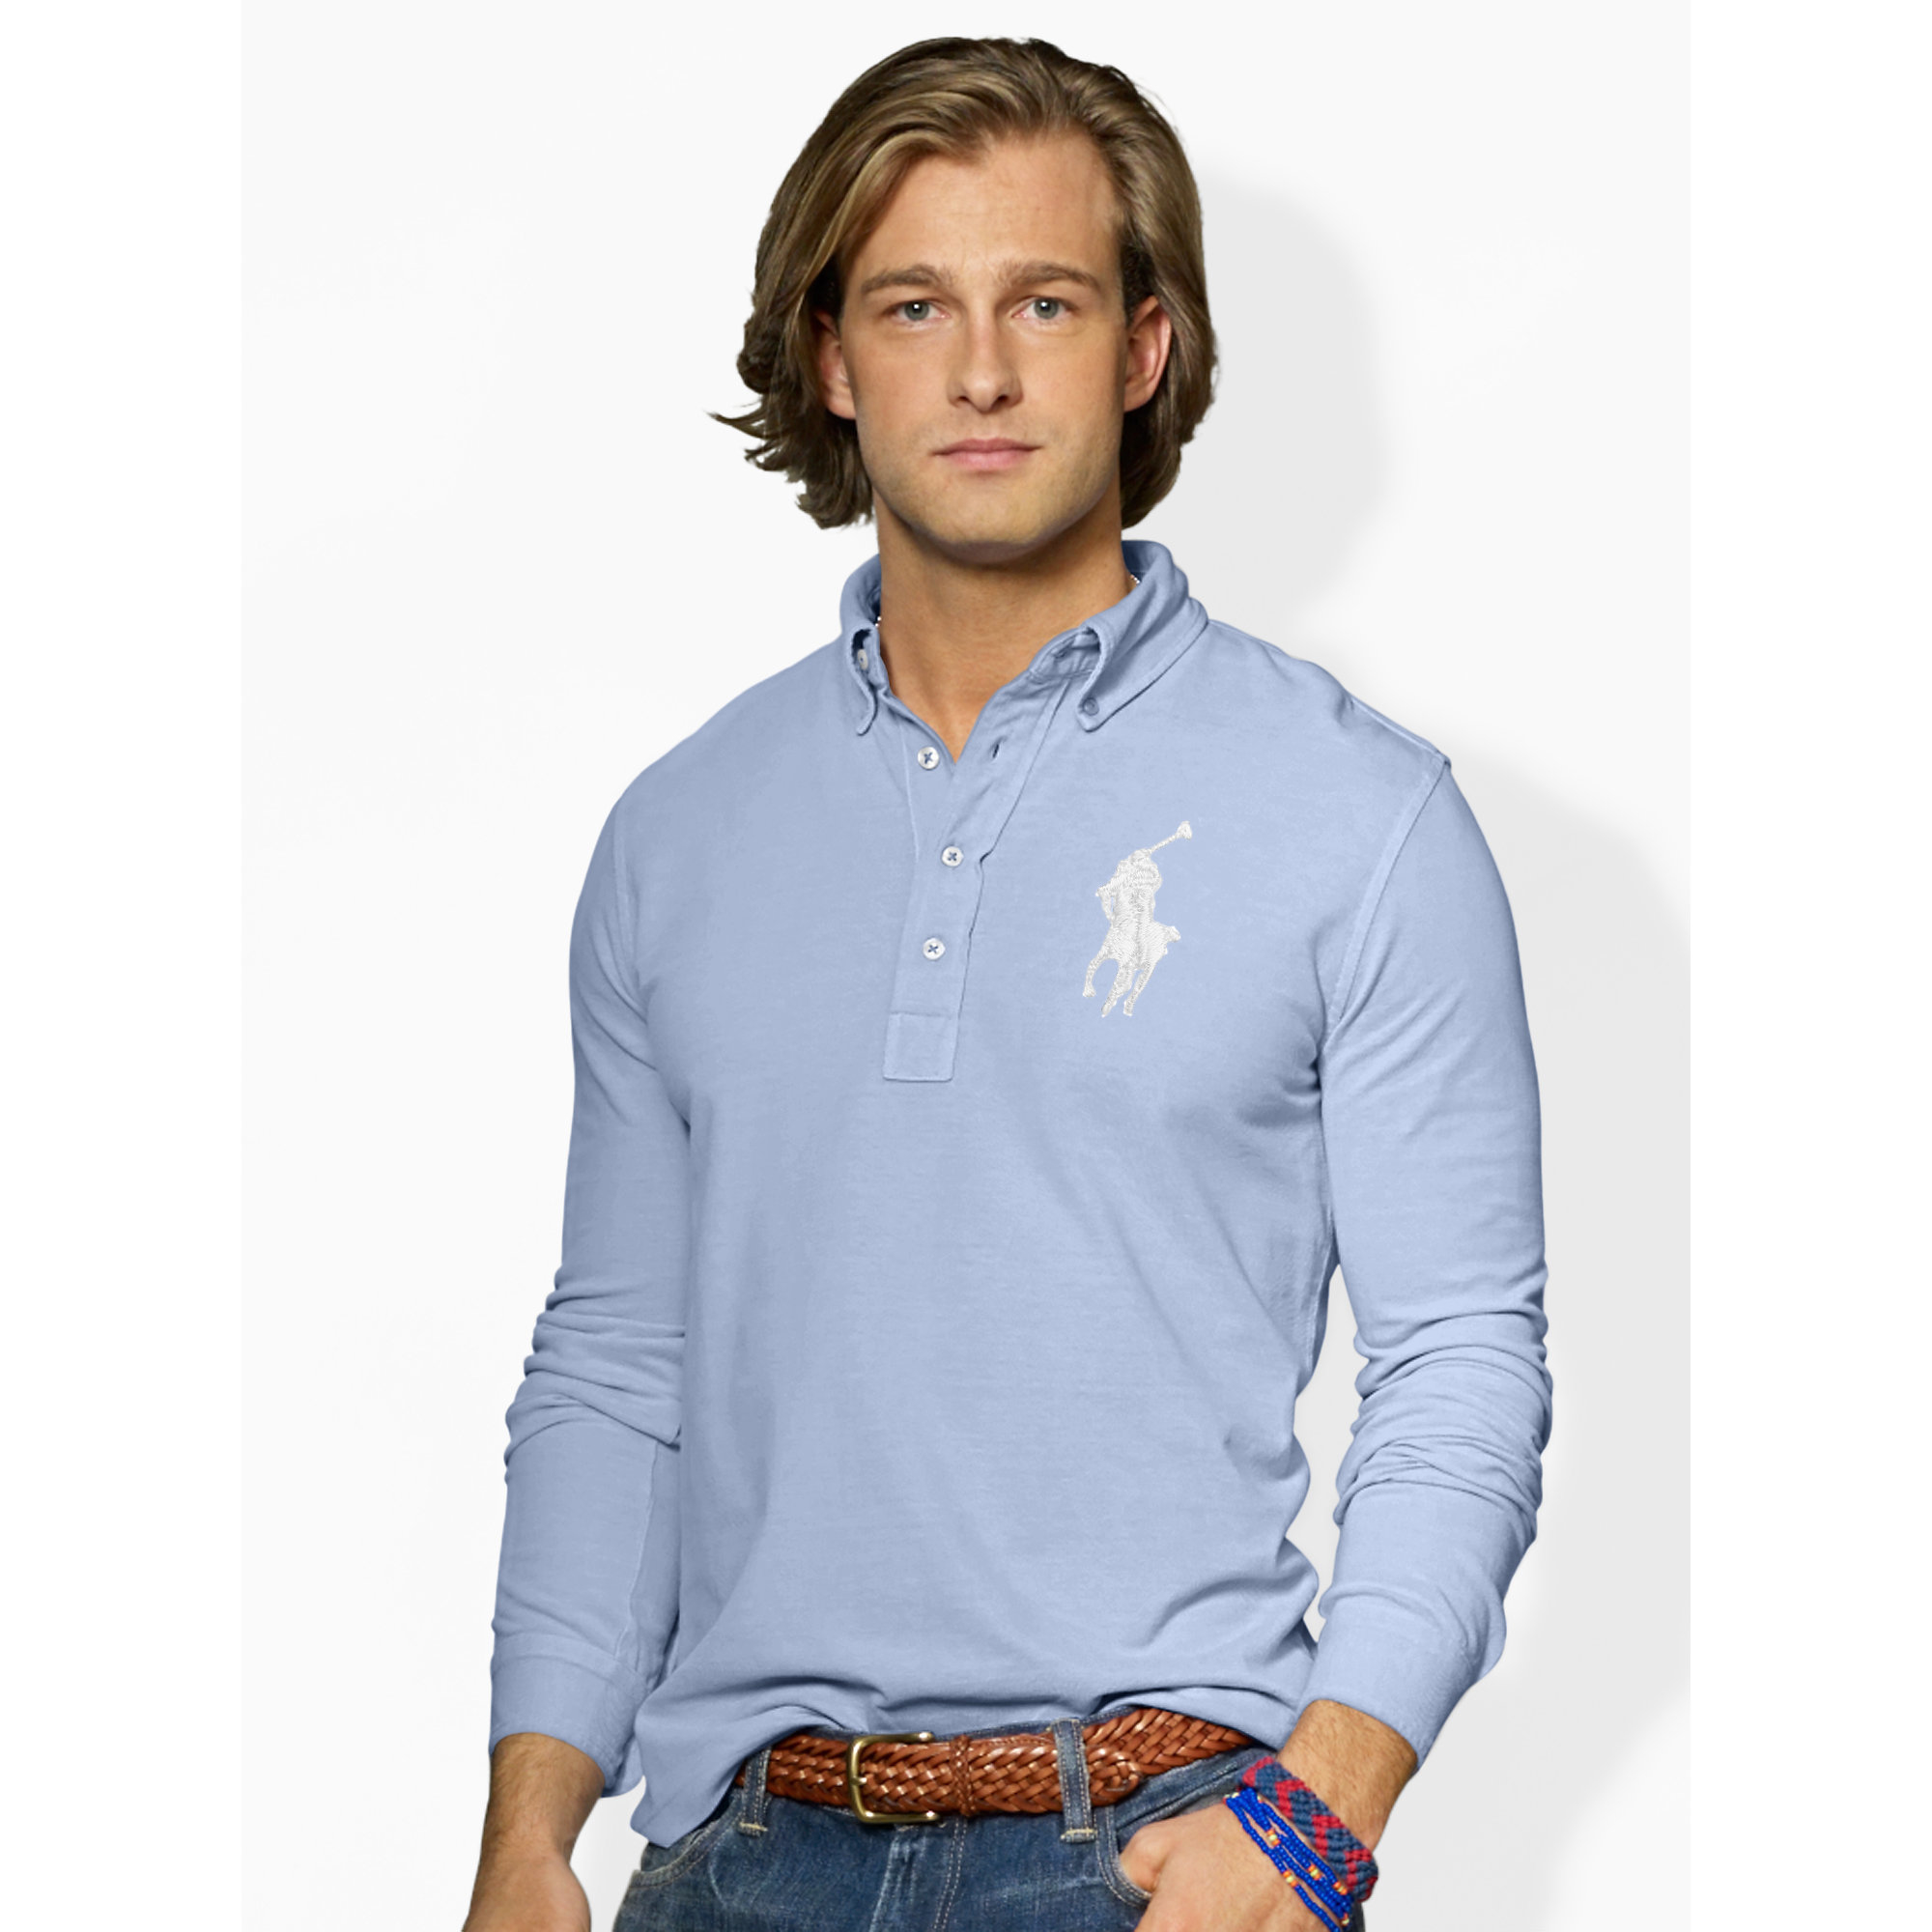 Polo Ralph Lauren Cotton Big Pony Featherweight Polo in Blue for Men - Lyst